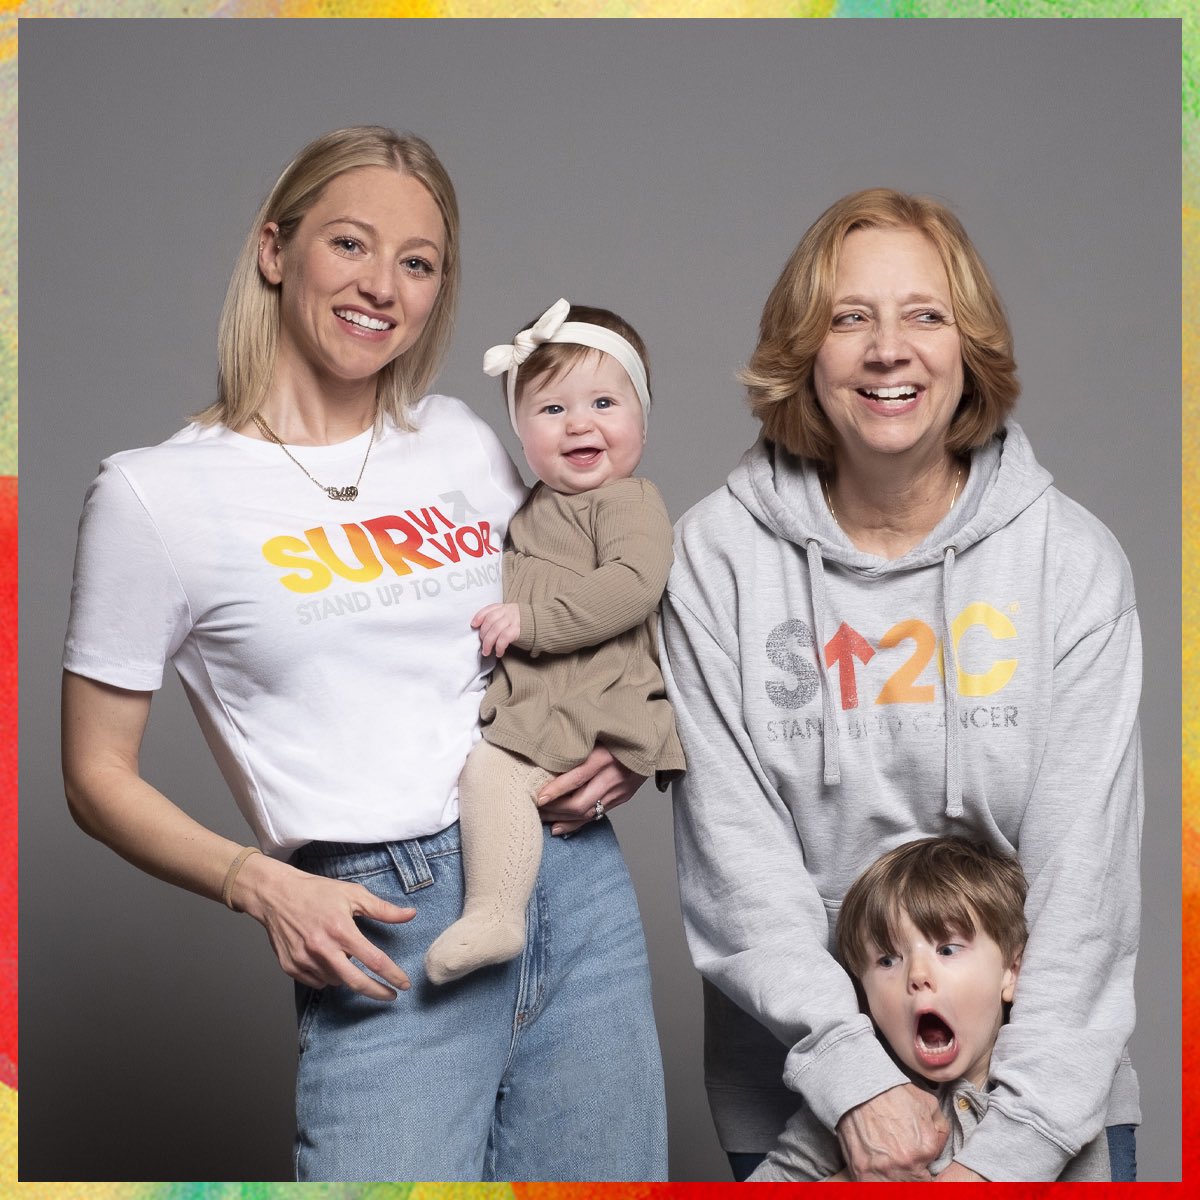 #WhenSheStandsUp, she treasures the gift of motherhood. ❤️ This #MothersDay, Kelly Spill is celebrating because she is cancer-free! 🎉 A #StandUpToCancer-funded clinical trial saved Kelly’s life and allowed her to grow her family with the birth of her daughter: “I’m just so…